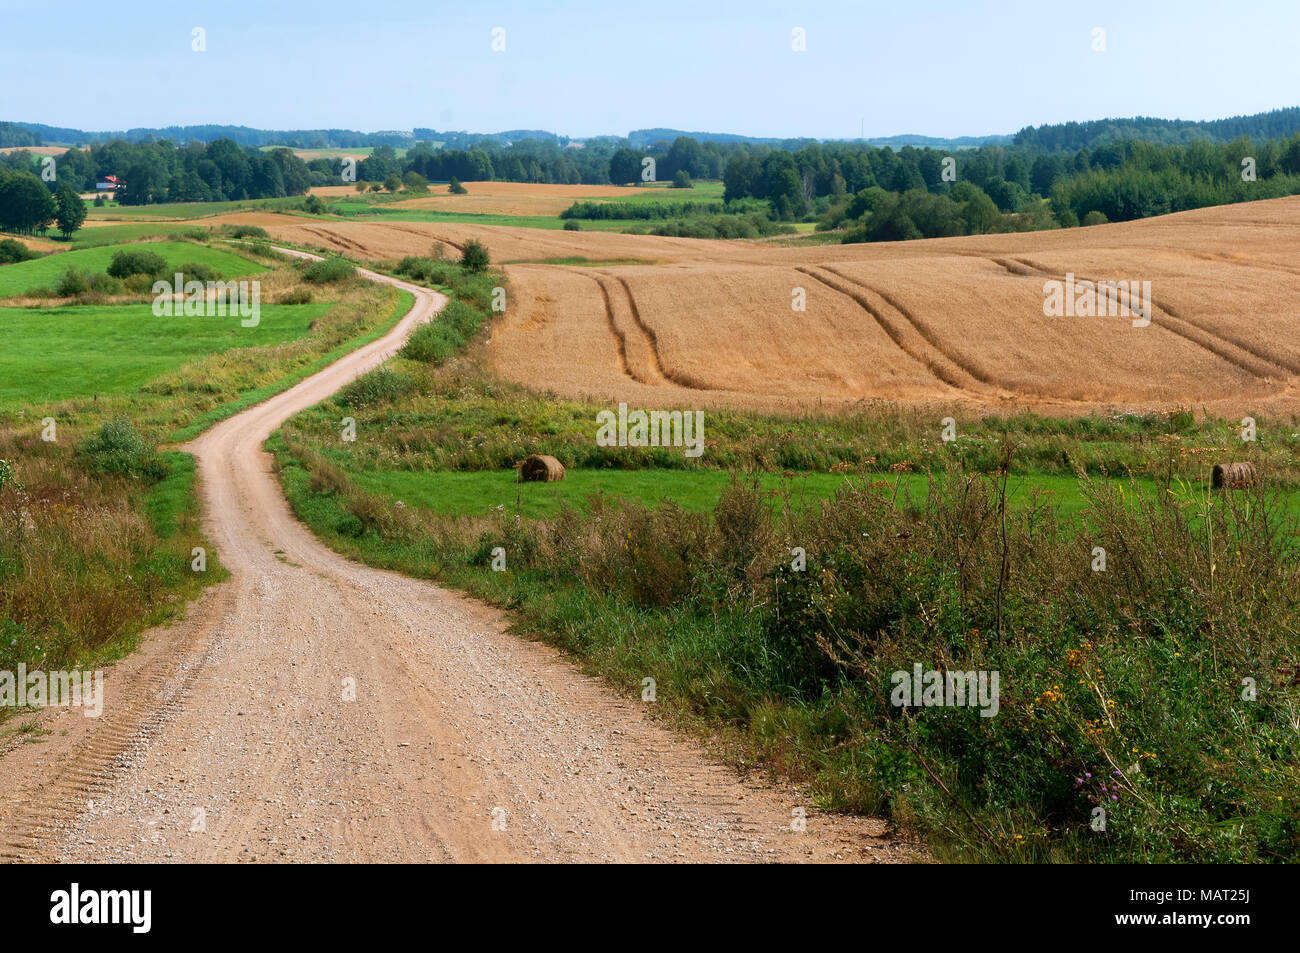 agricultural land, long road in plowed field, dirt road in the middle of the field Stock Photo